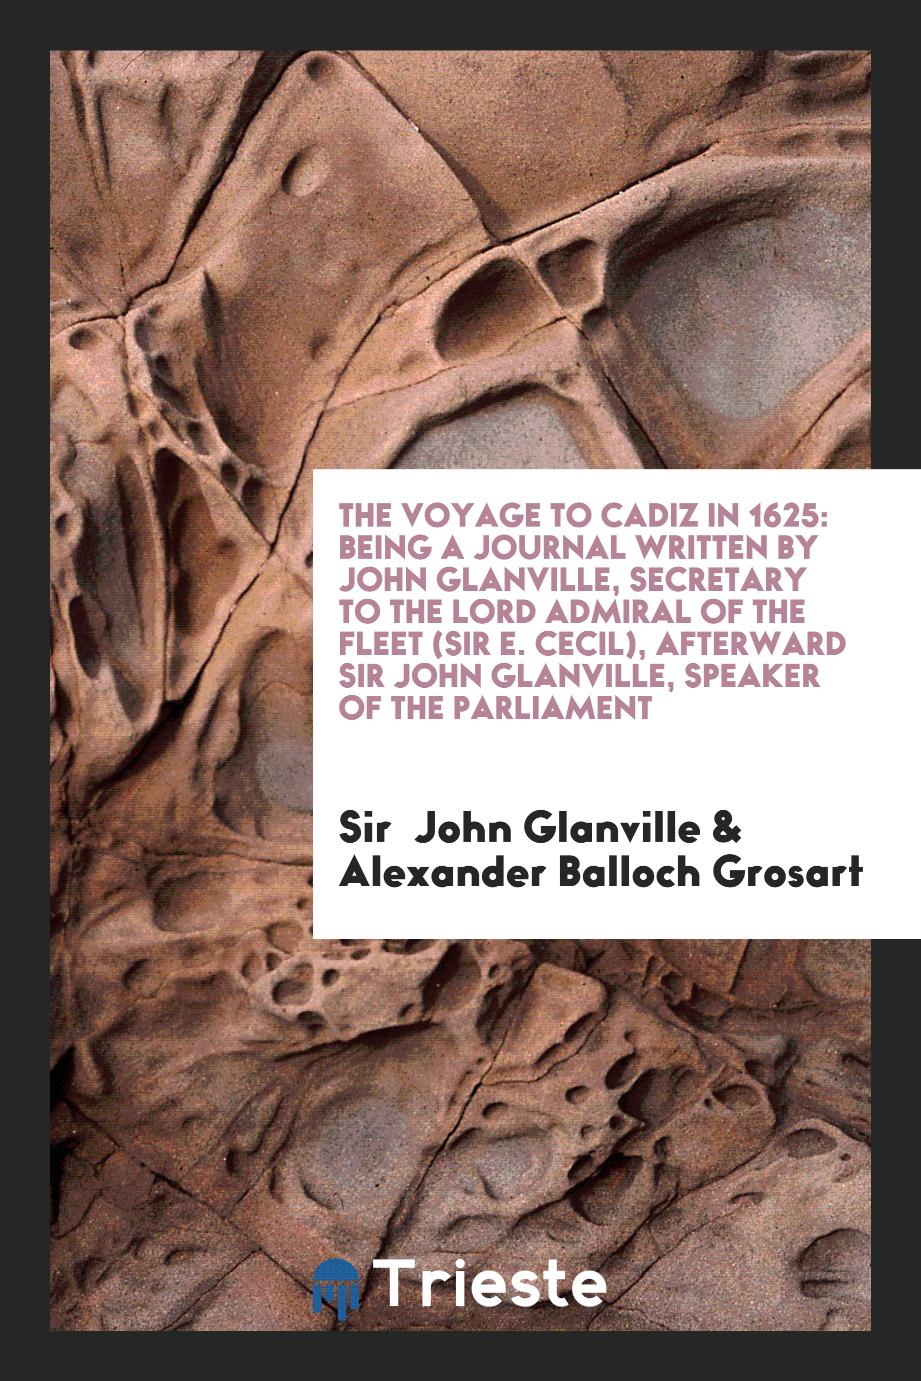 The Voyage to Cadiz in 1625: Being a Journal Written by John Glanville, Secretary to the Lord Admiral of the Fleet (Sir E. Cecil), Afterward Sir John Glanville, Speaker of the Parliament